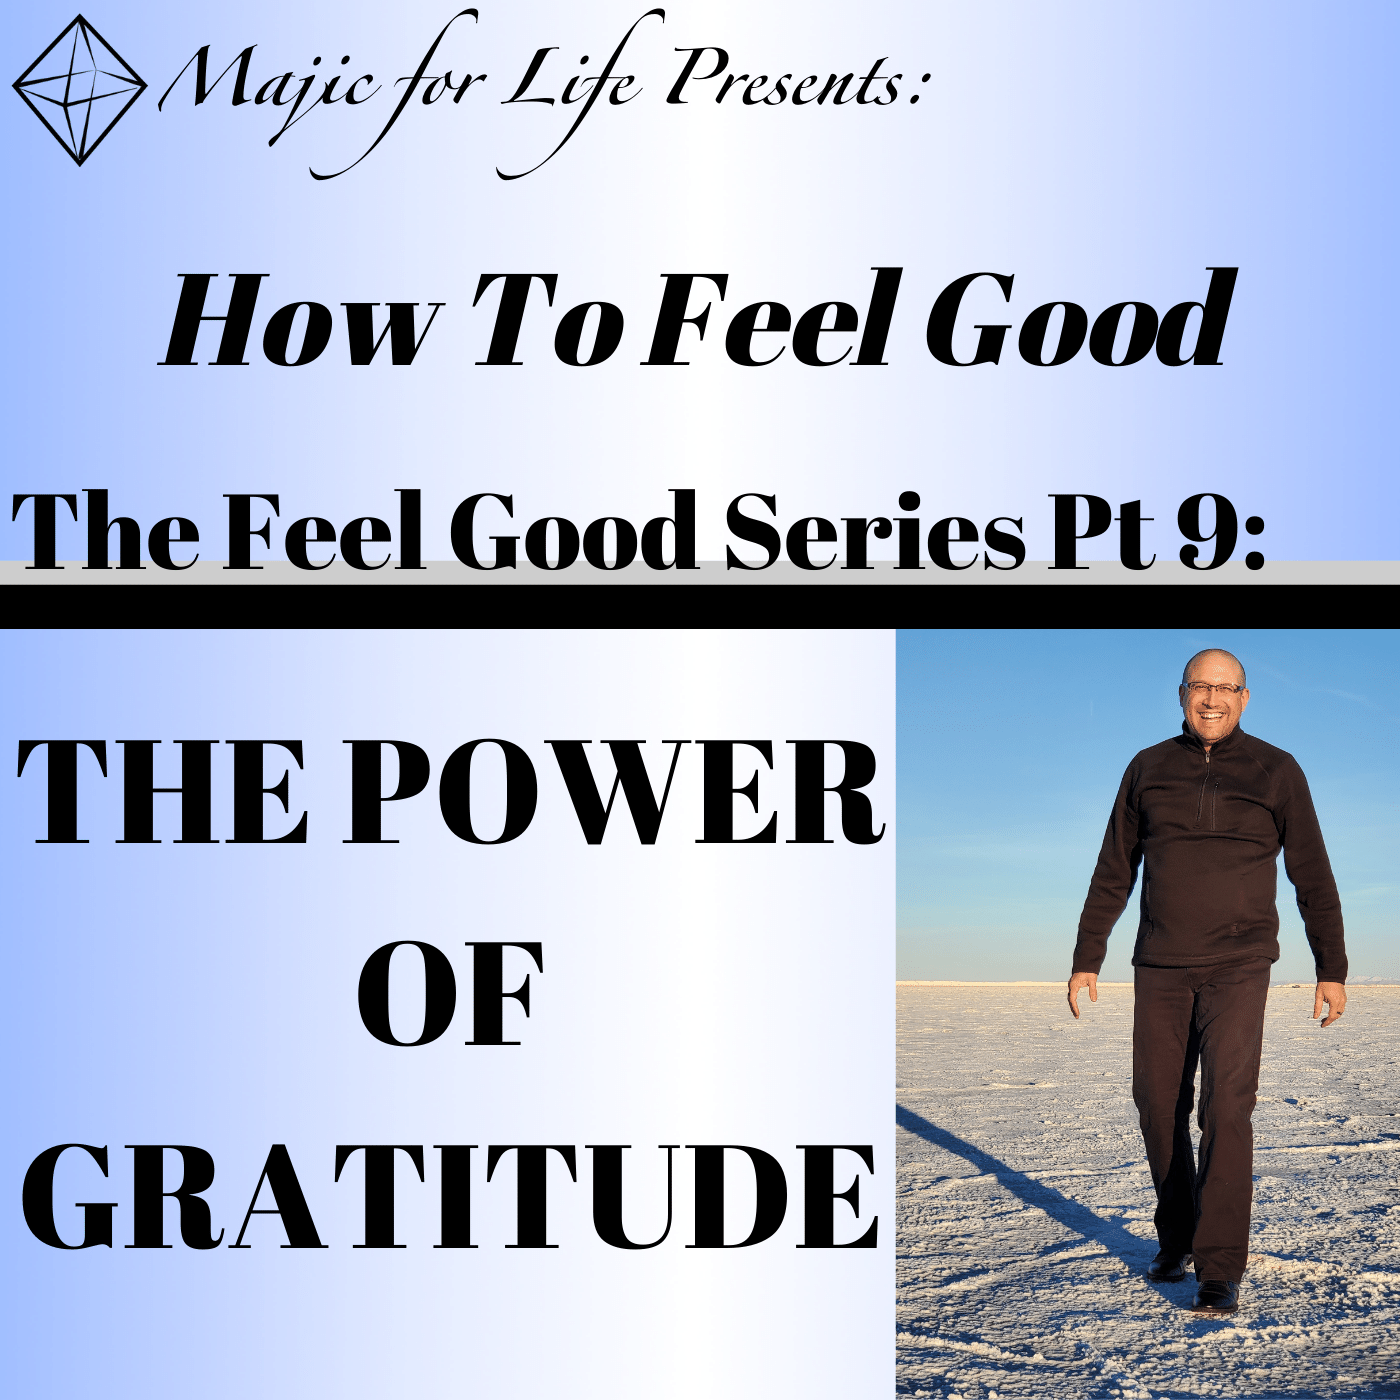 Episode 295 How to Feel Good... The Feel Good Series Pt 9: THE POWER OF GRATITUDE